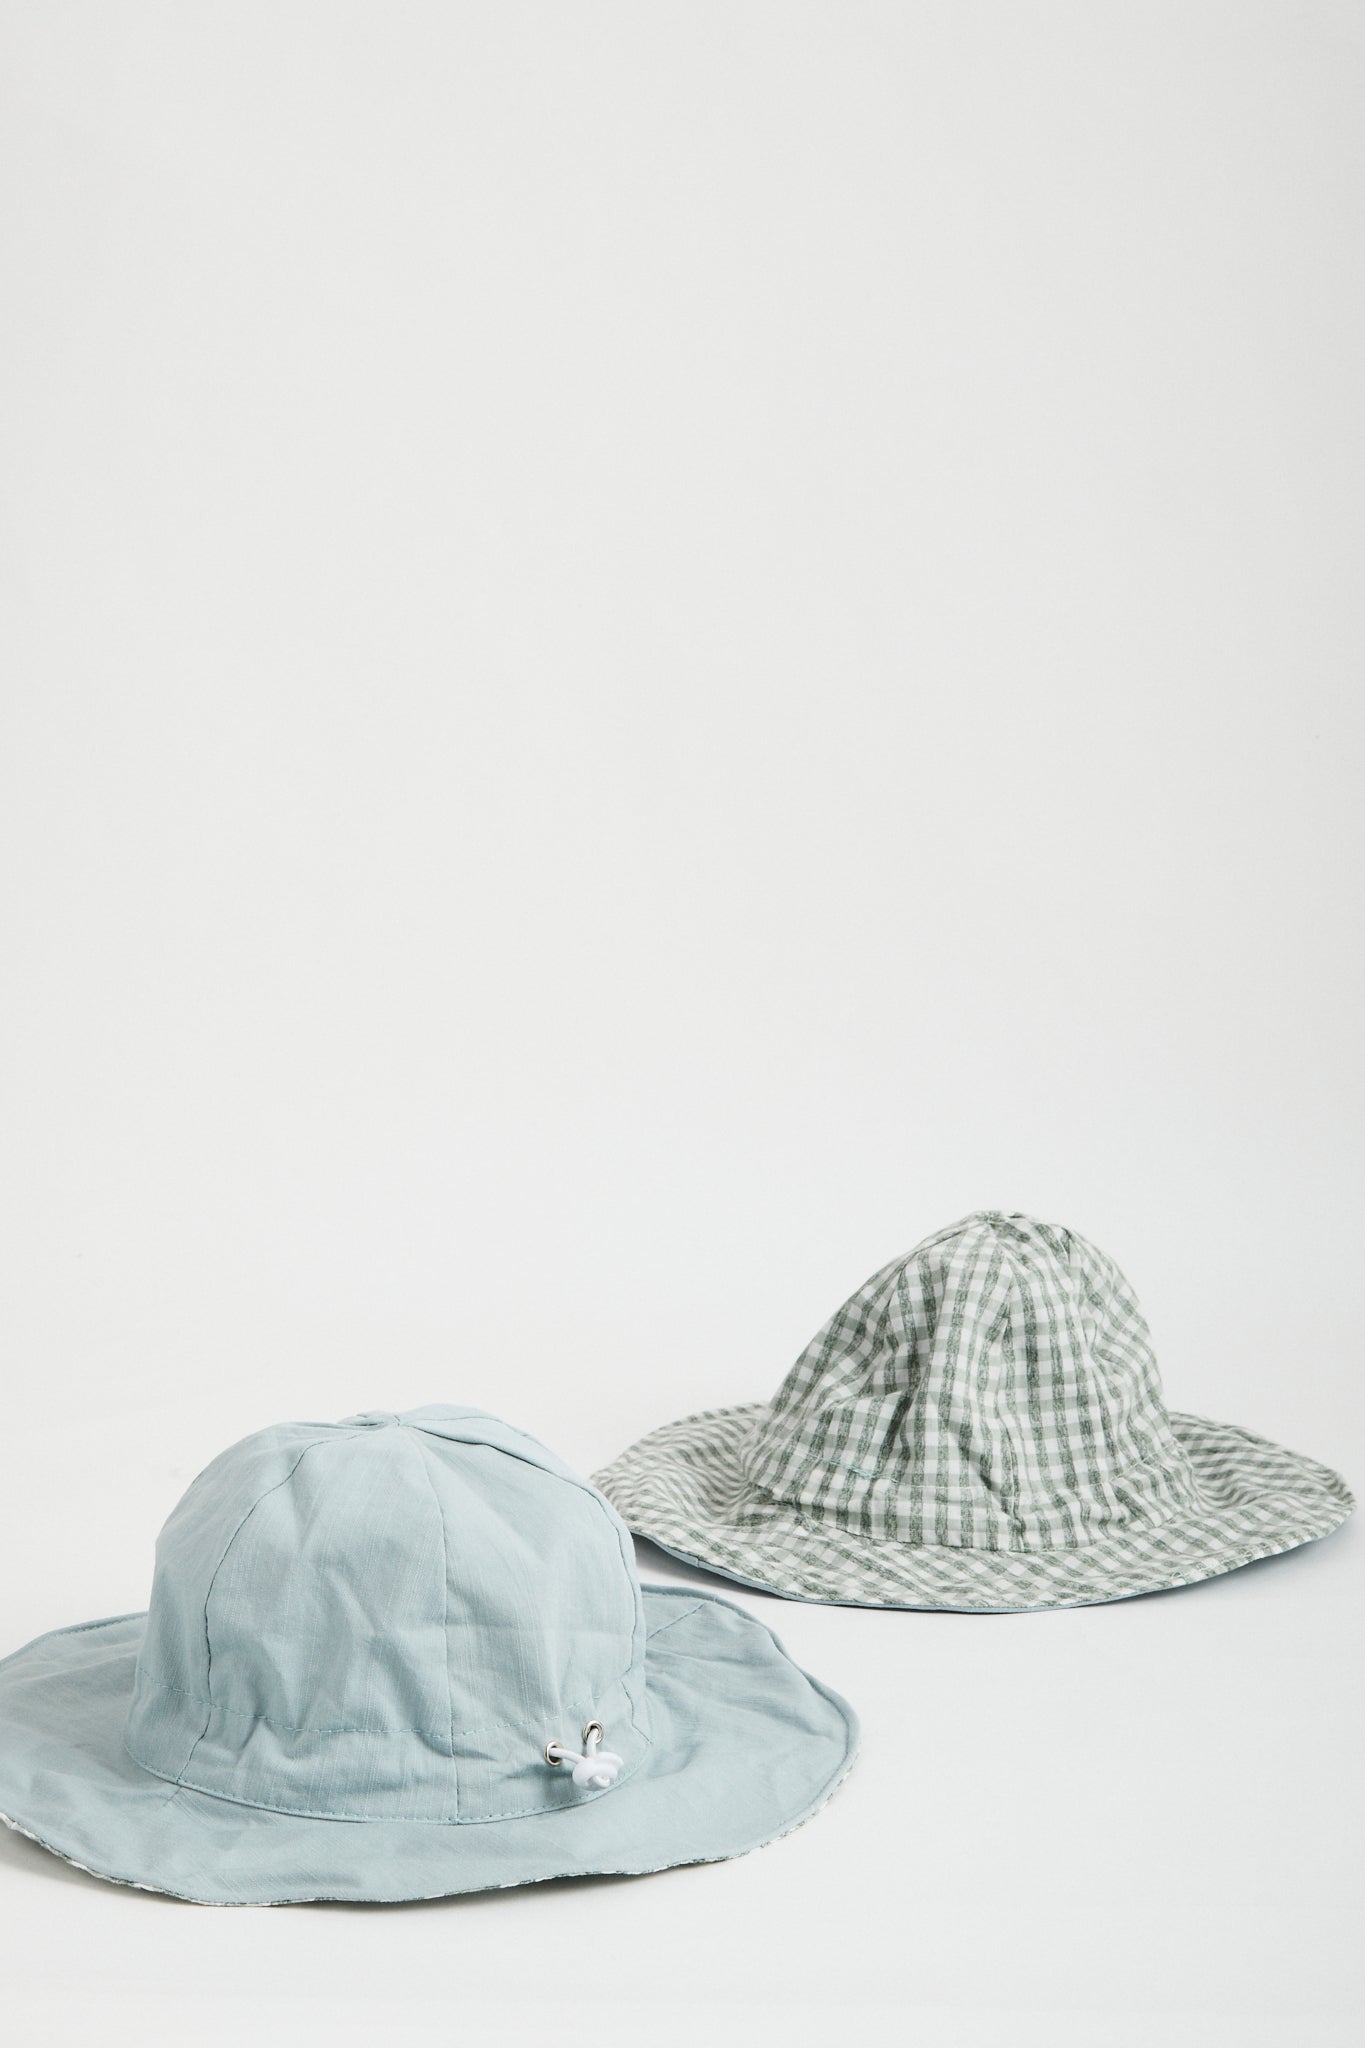 Blue Gingham reversible sun hat. Drawstring toggle and wire brim.